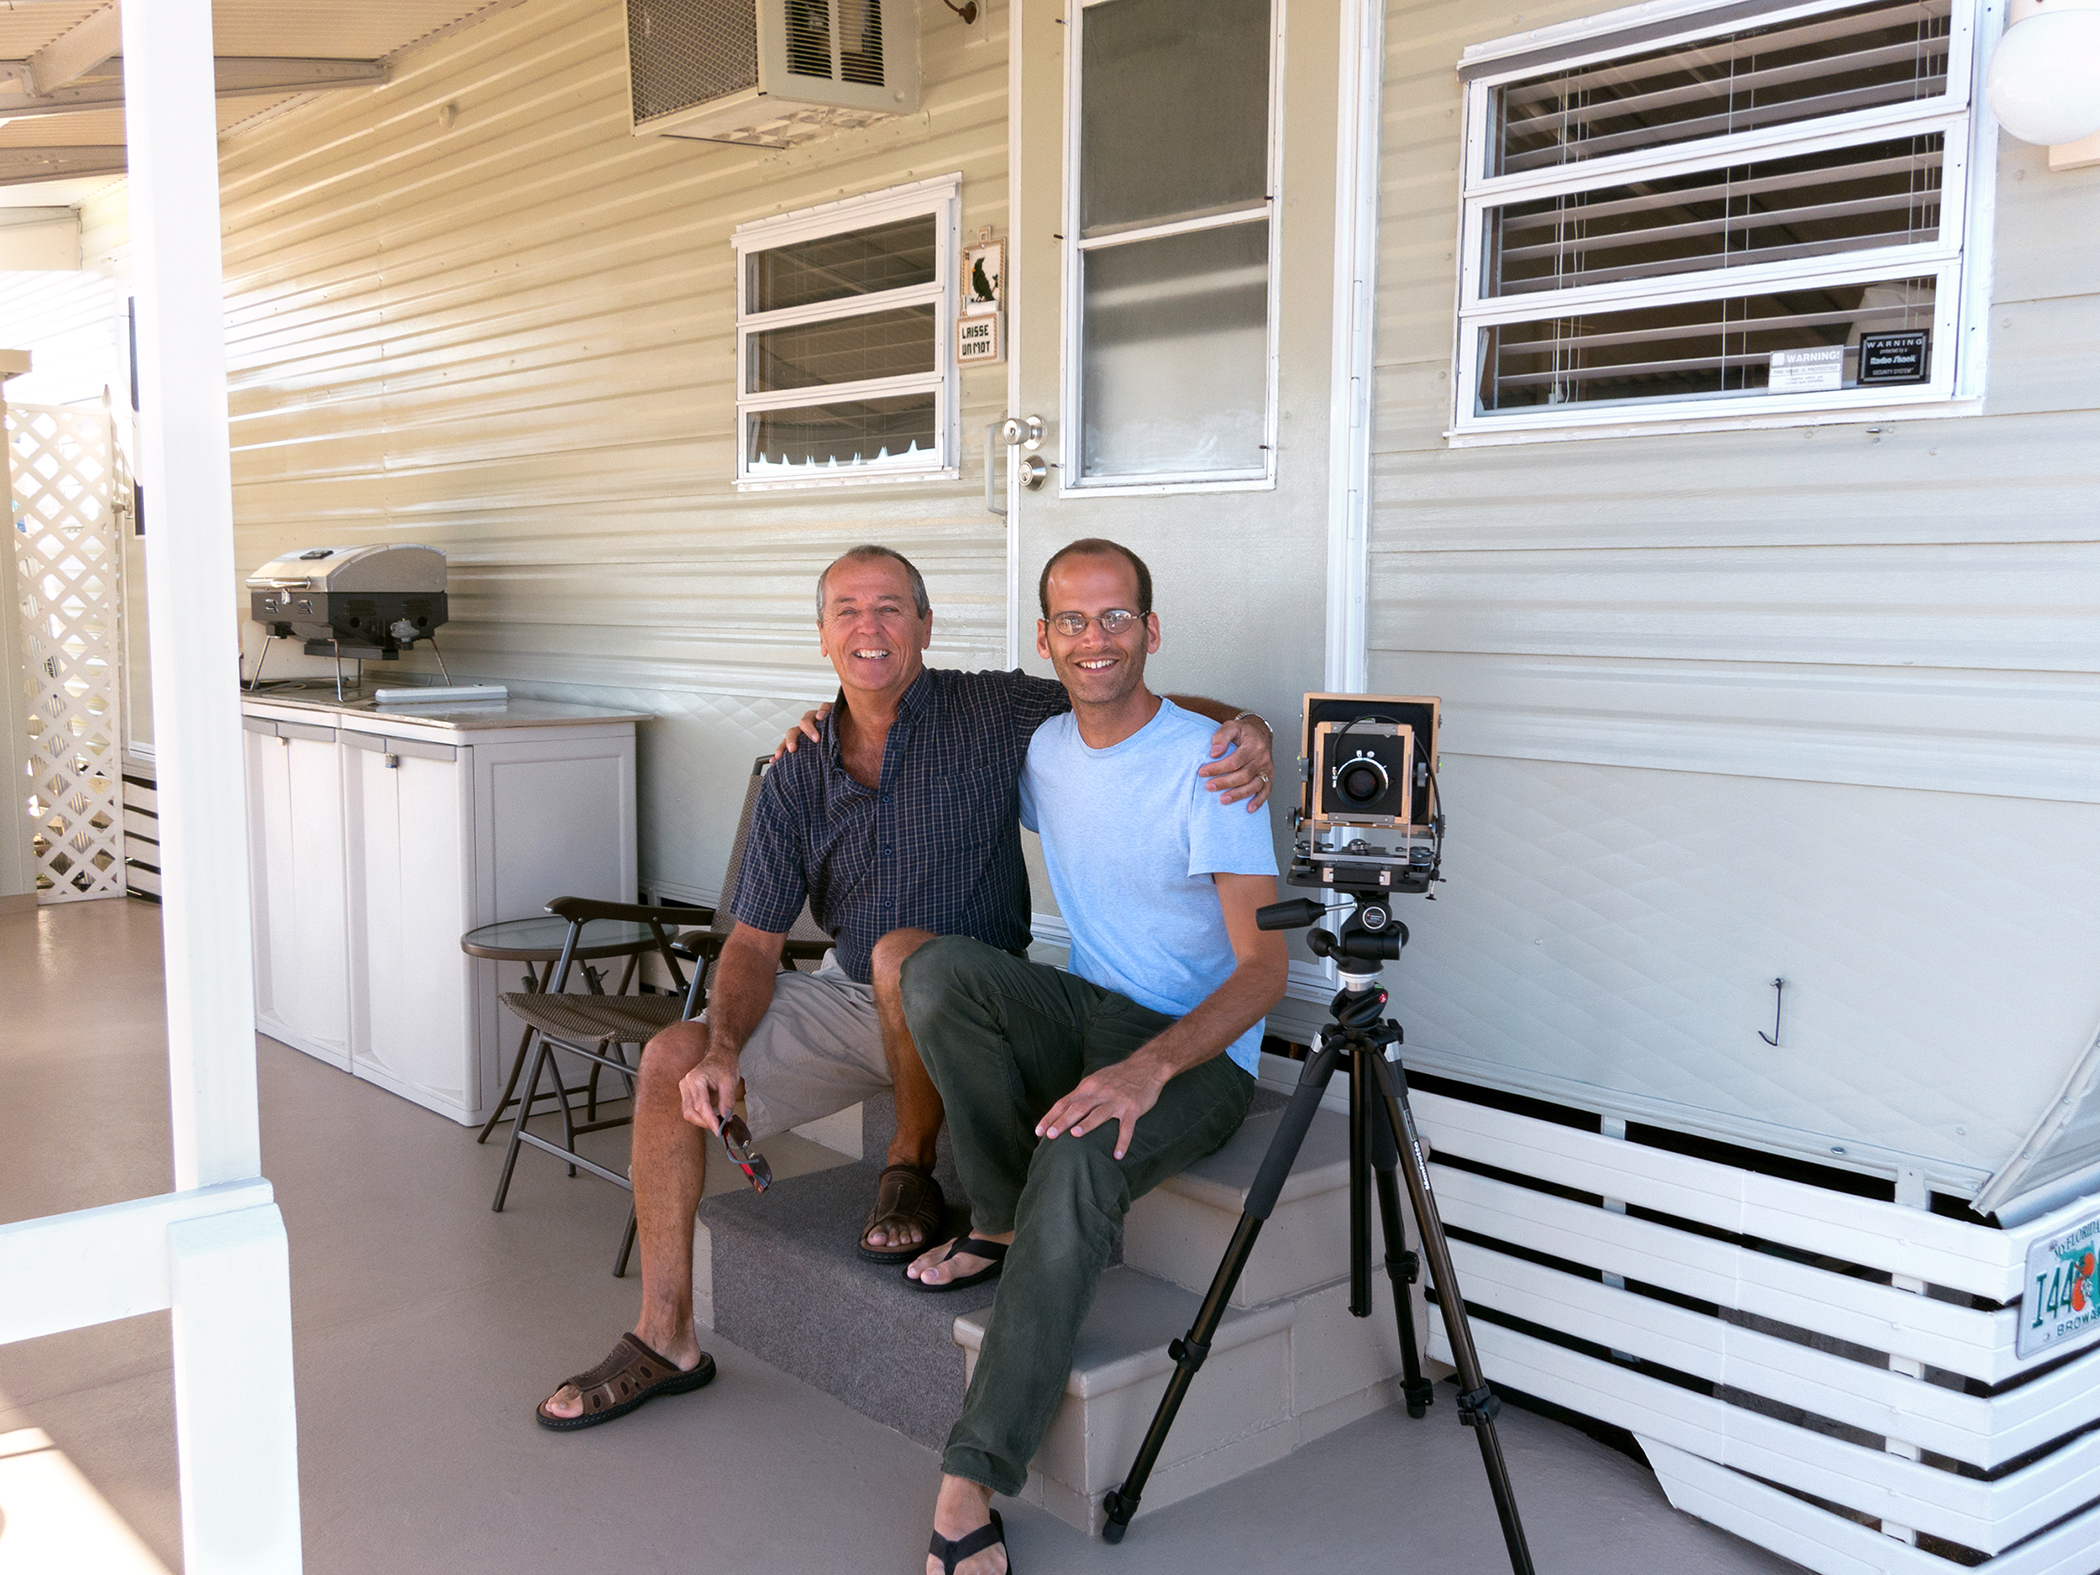 Mika Goodfriend (right) with his 4x5 camera and Fernand, Breezy Hill, FL.